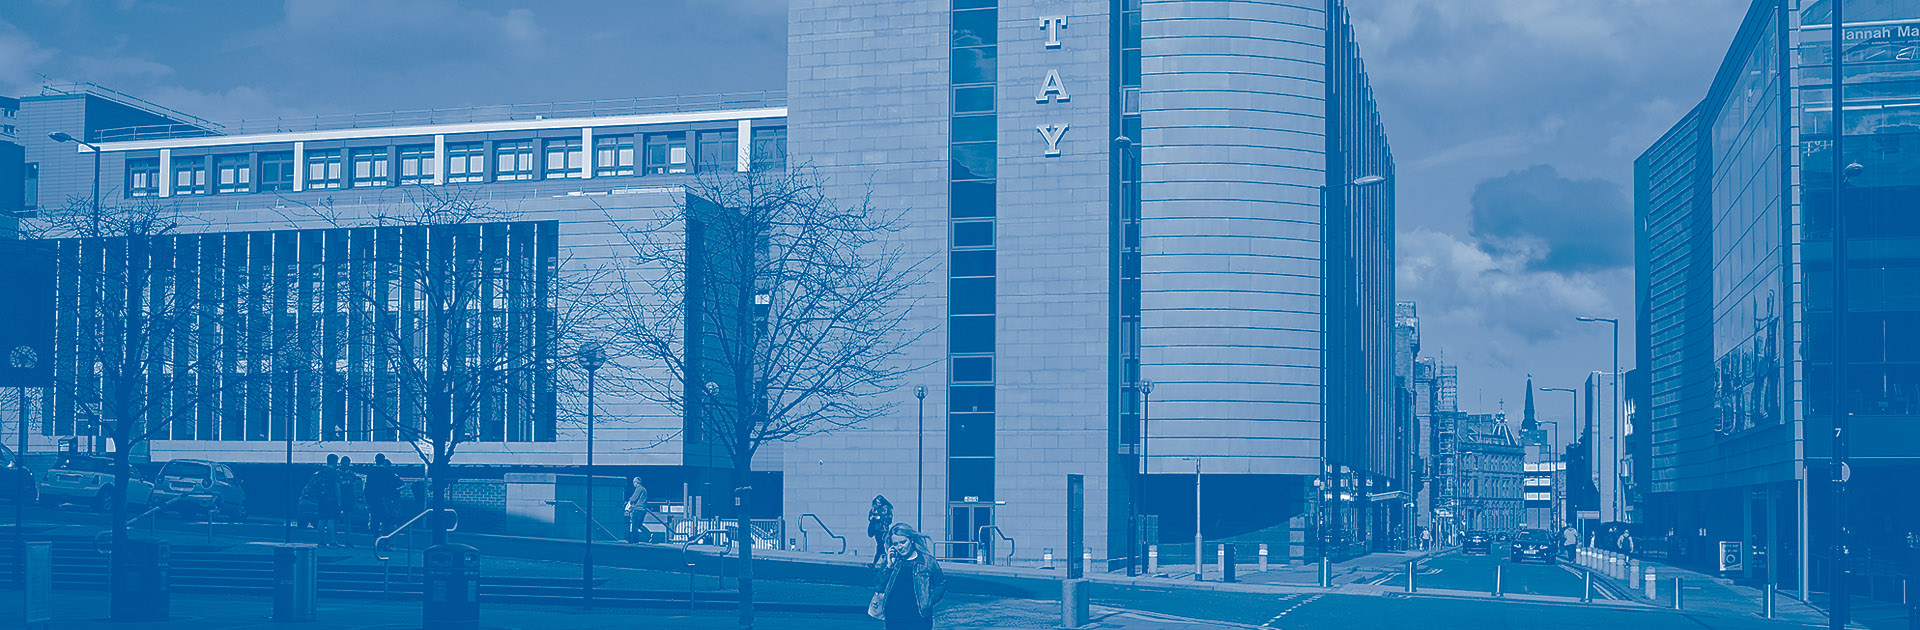 The Kydd Building - Abertay Campus